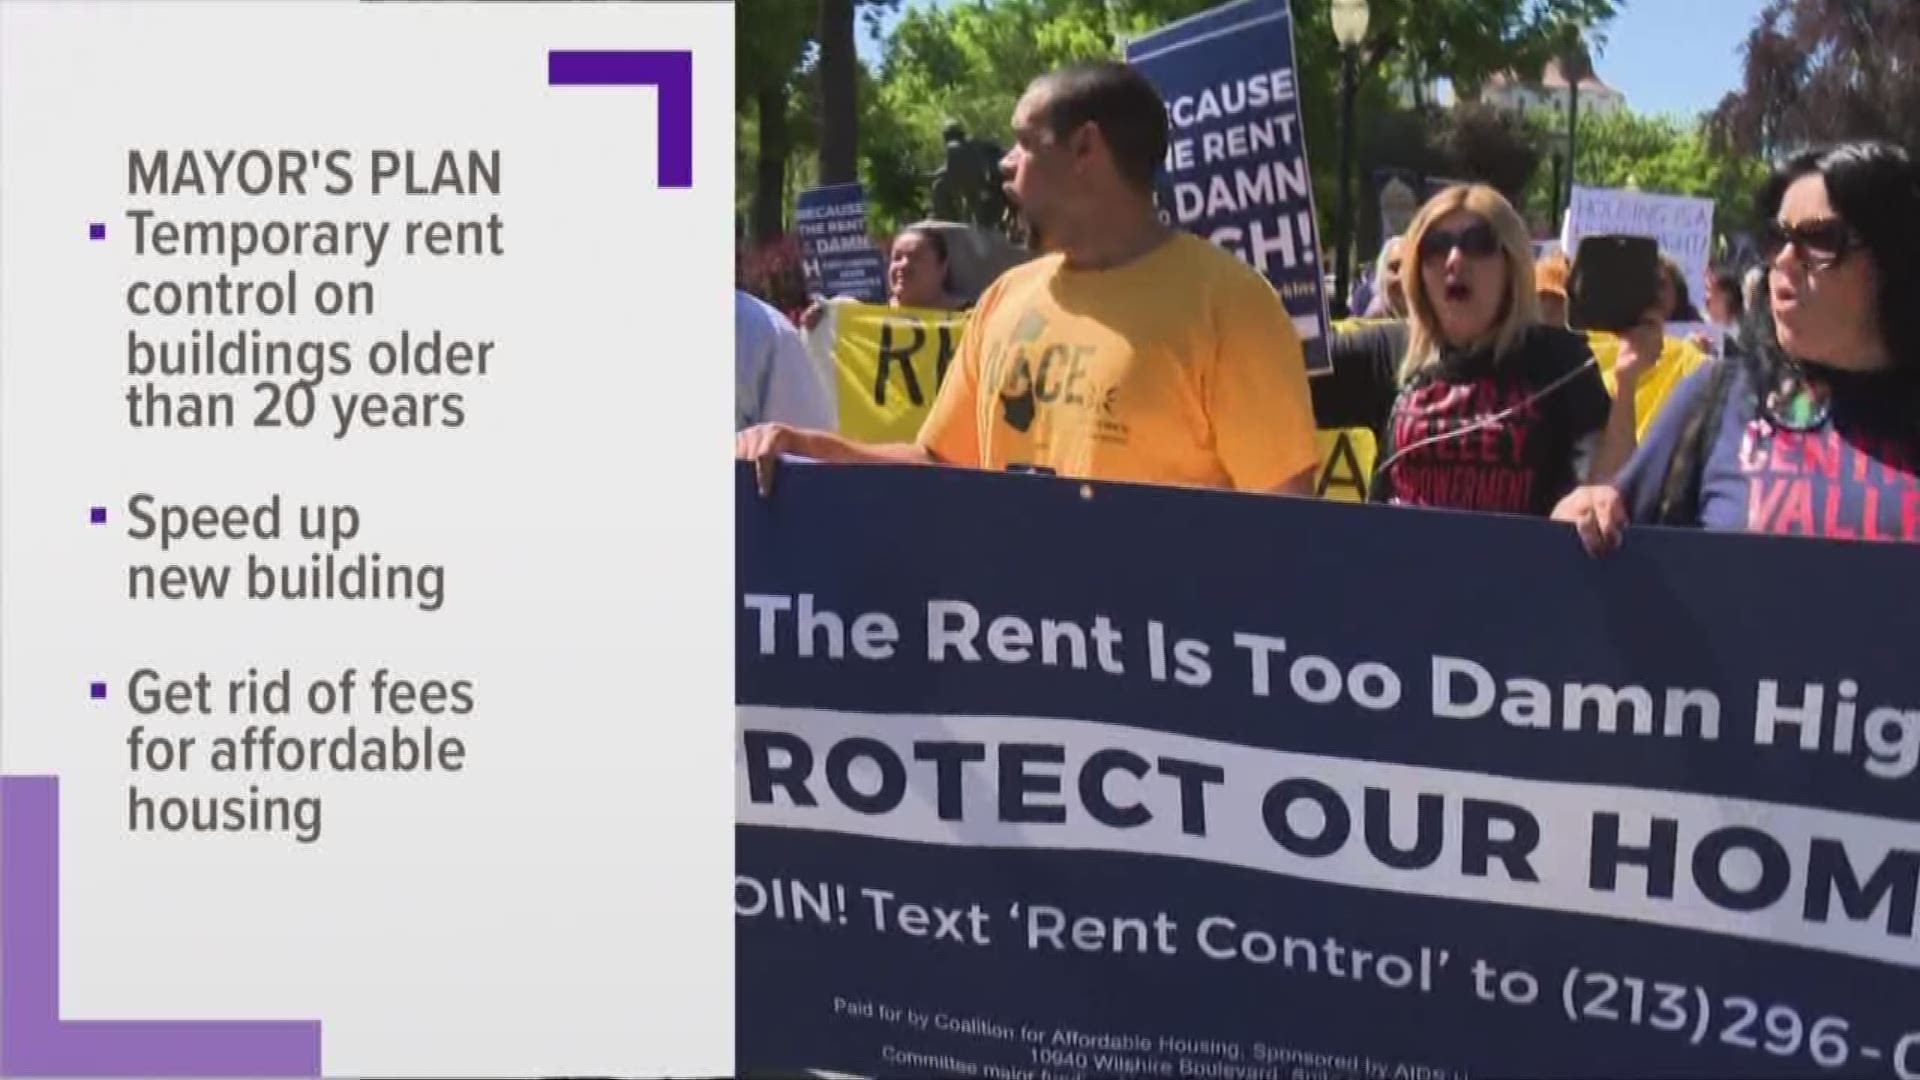 With two plans to address rising rent prices and affordable housing, Sacramento may be looking into an area that only a handful of other cities have looked at before. Rent control has only been implemented in a handful of California cities.